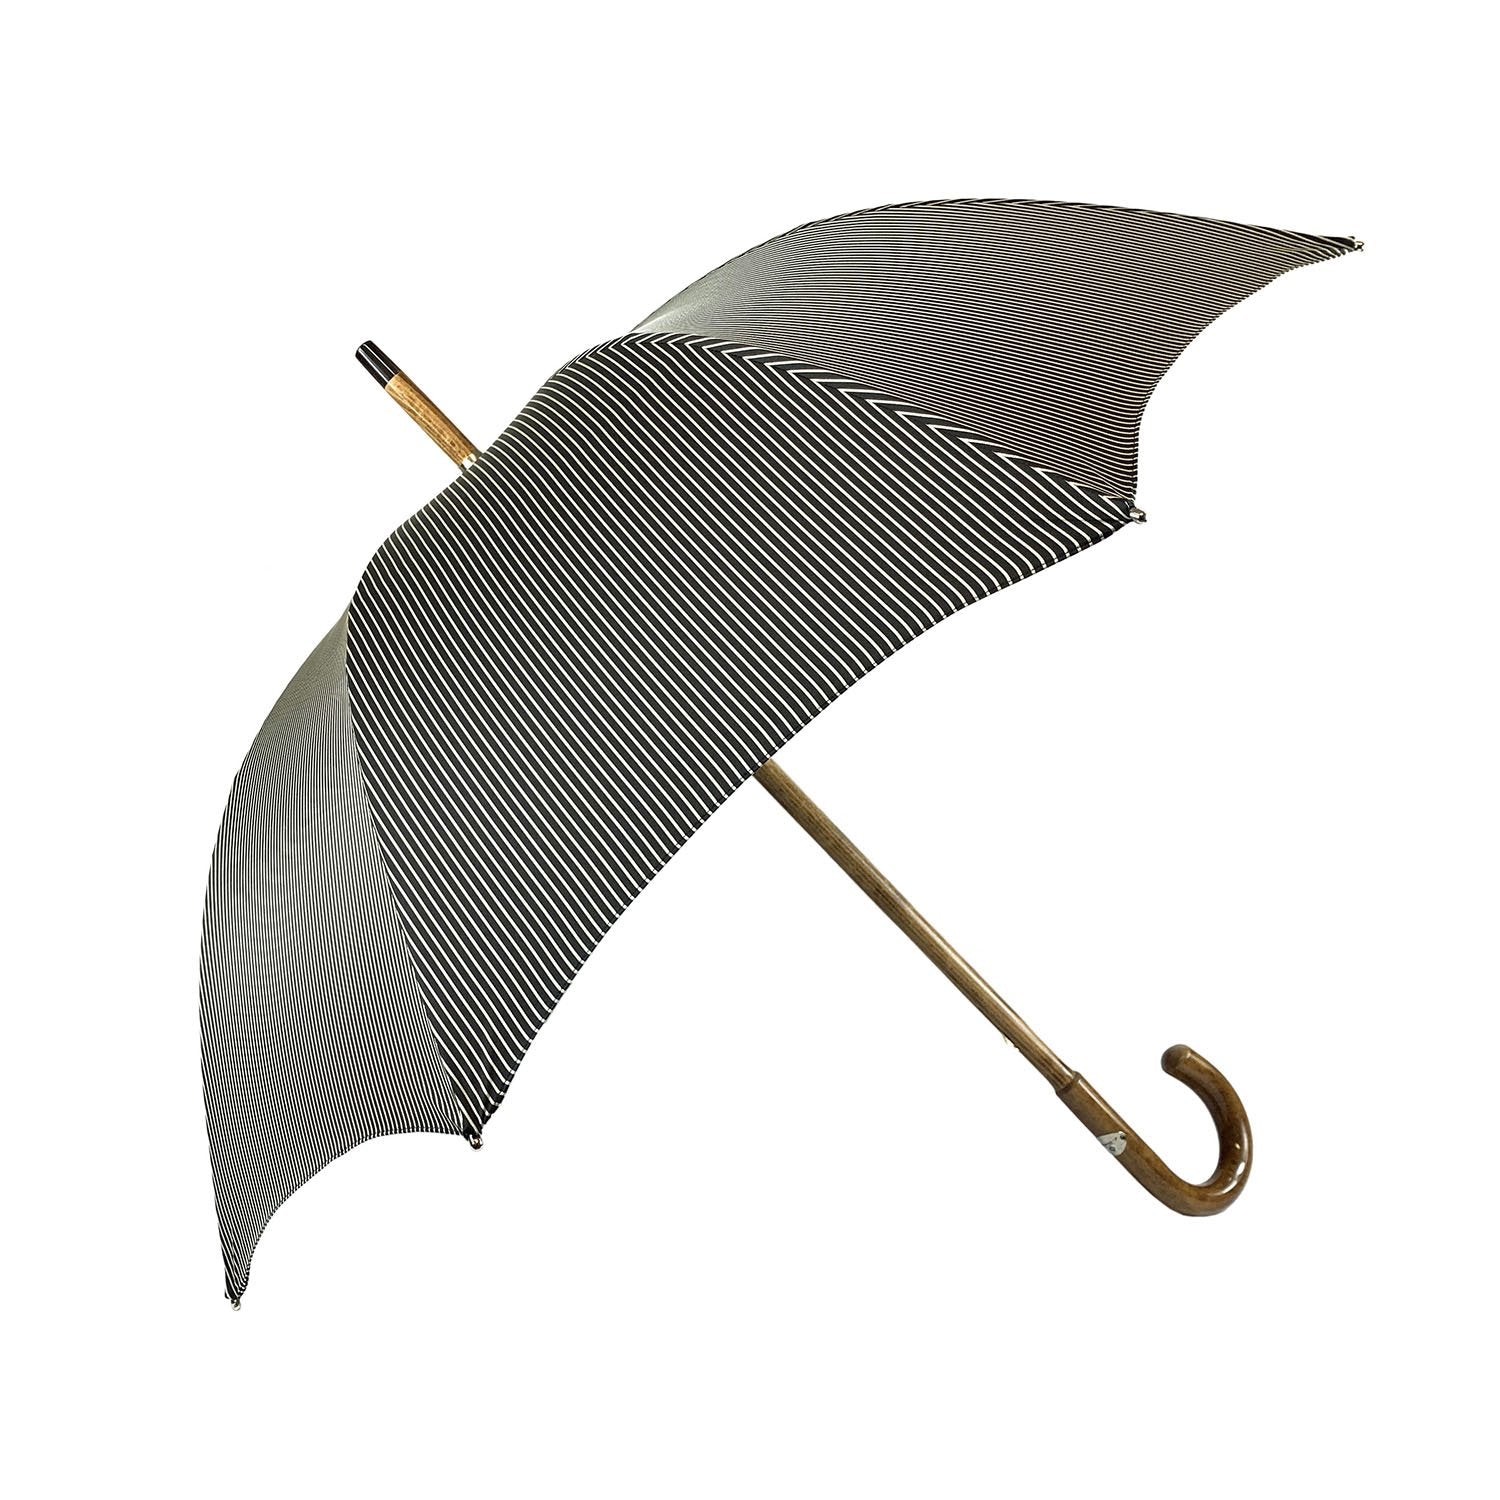 Black&White umbrella with Malacca Wood hand-curved - IL MARCHESATO LUXURY UMBRELLAS, CANES AND SHOEHORNS